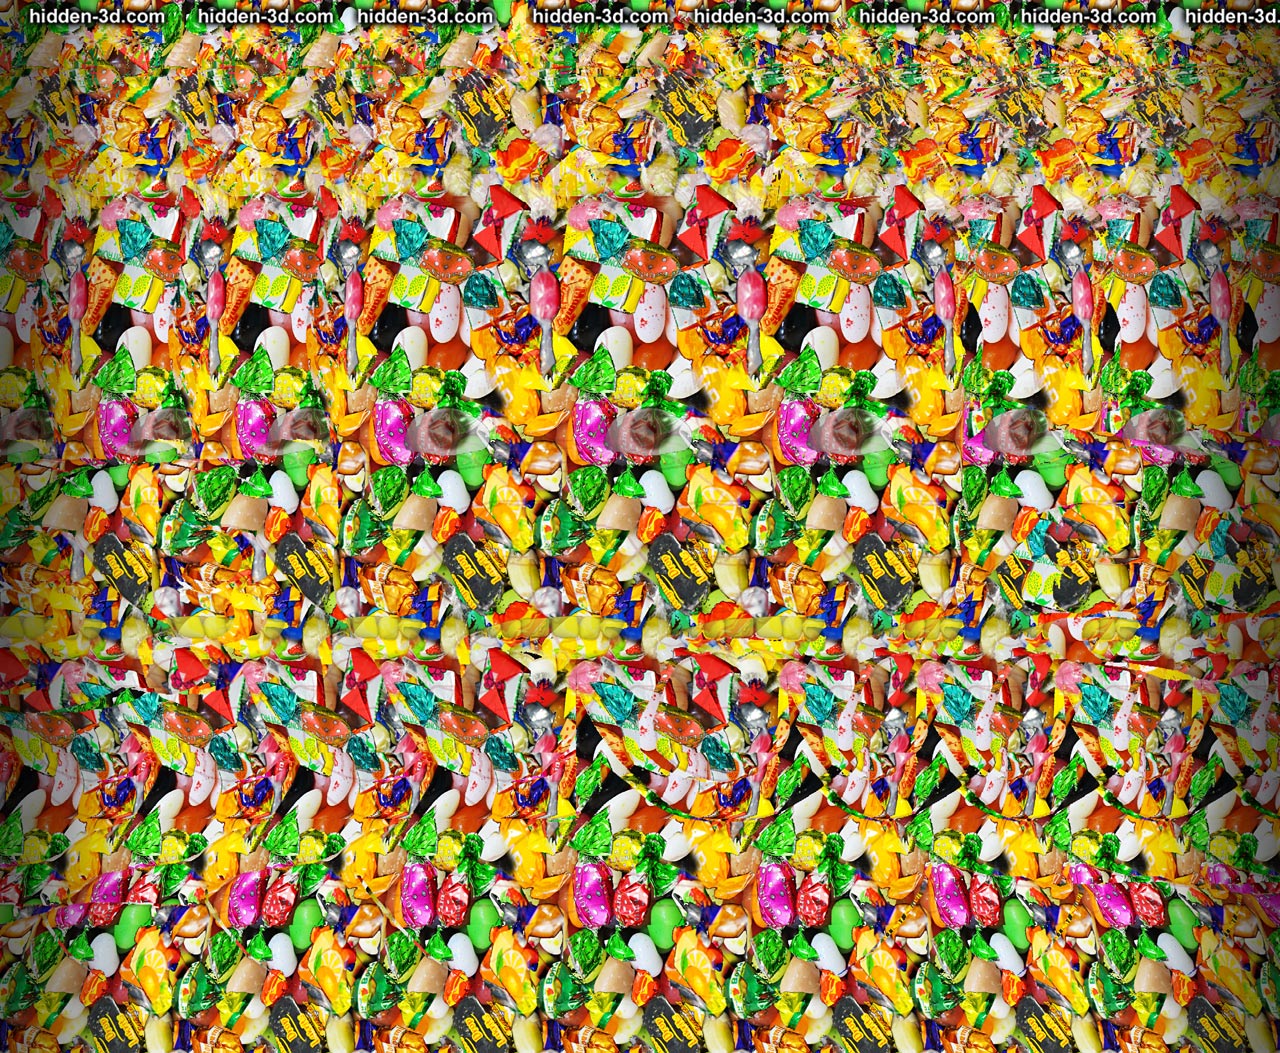 April fool Crosseyed version : Stereogram Images, Games, Video and  Software. All Free!